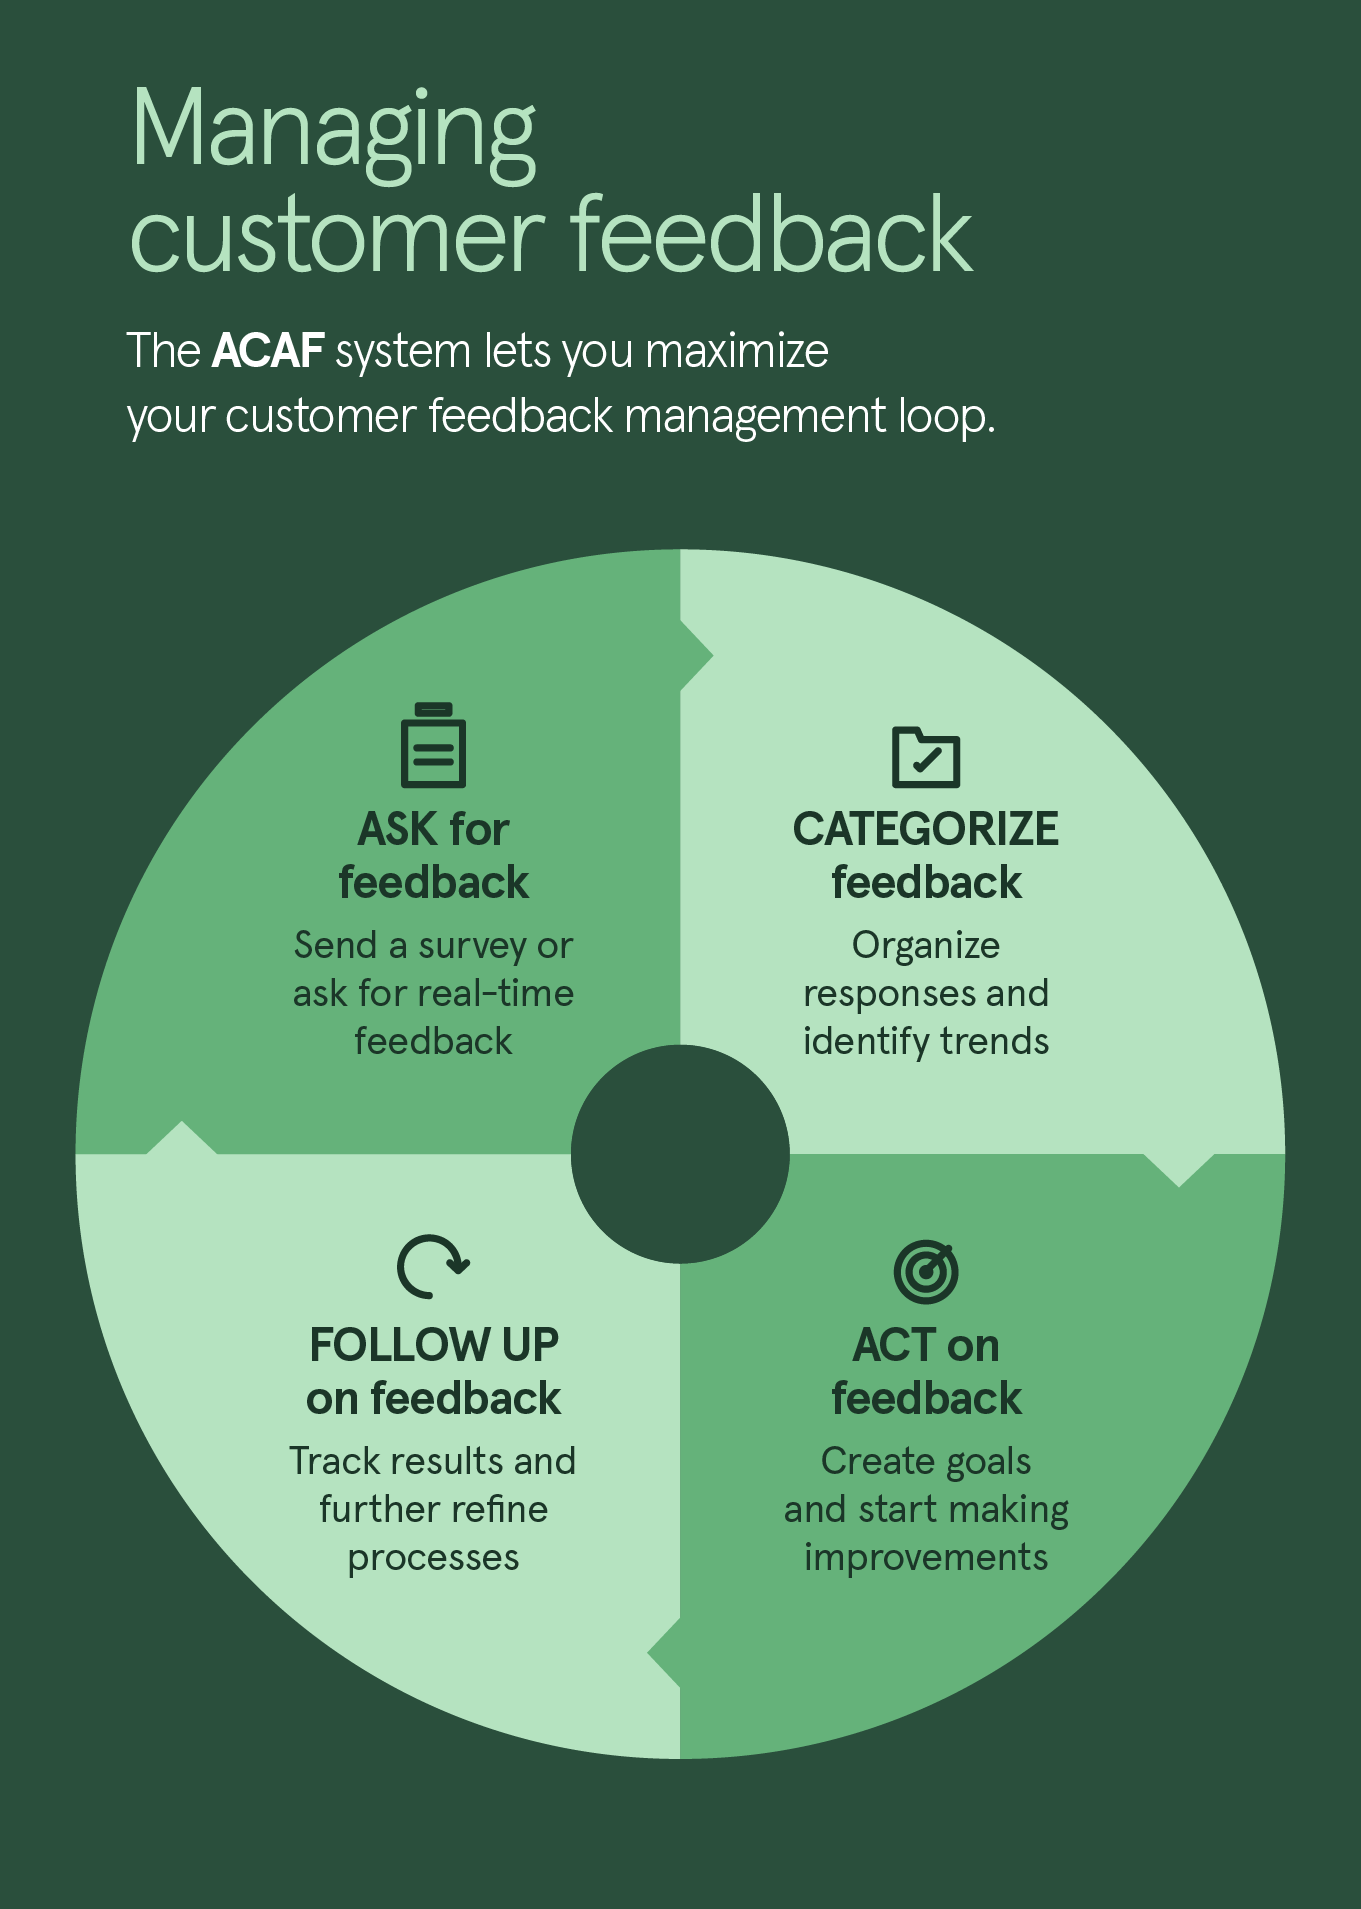 An illustrated chart showing how the ACAF system of managing customer feedback works.